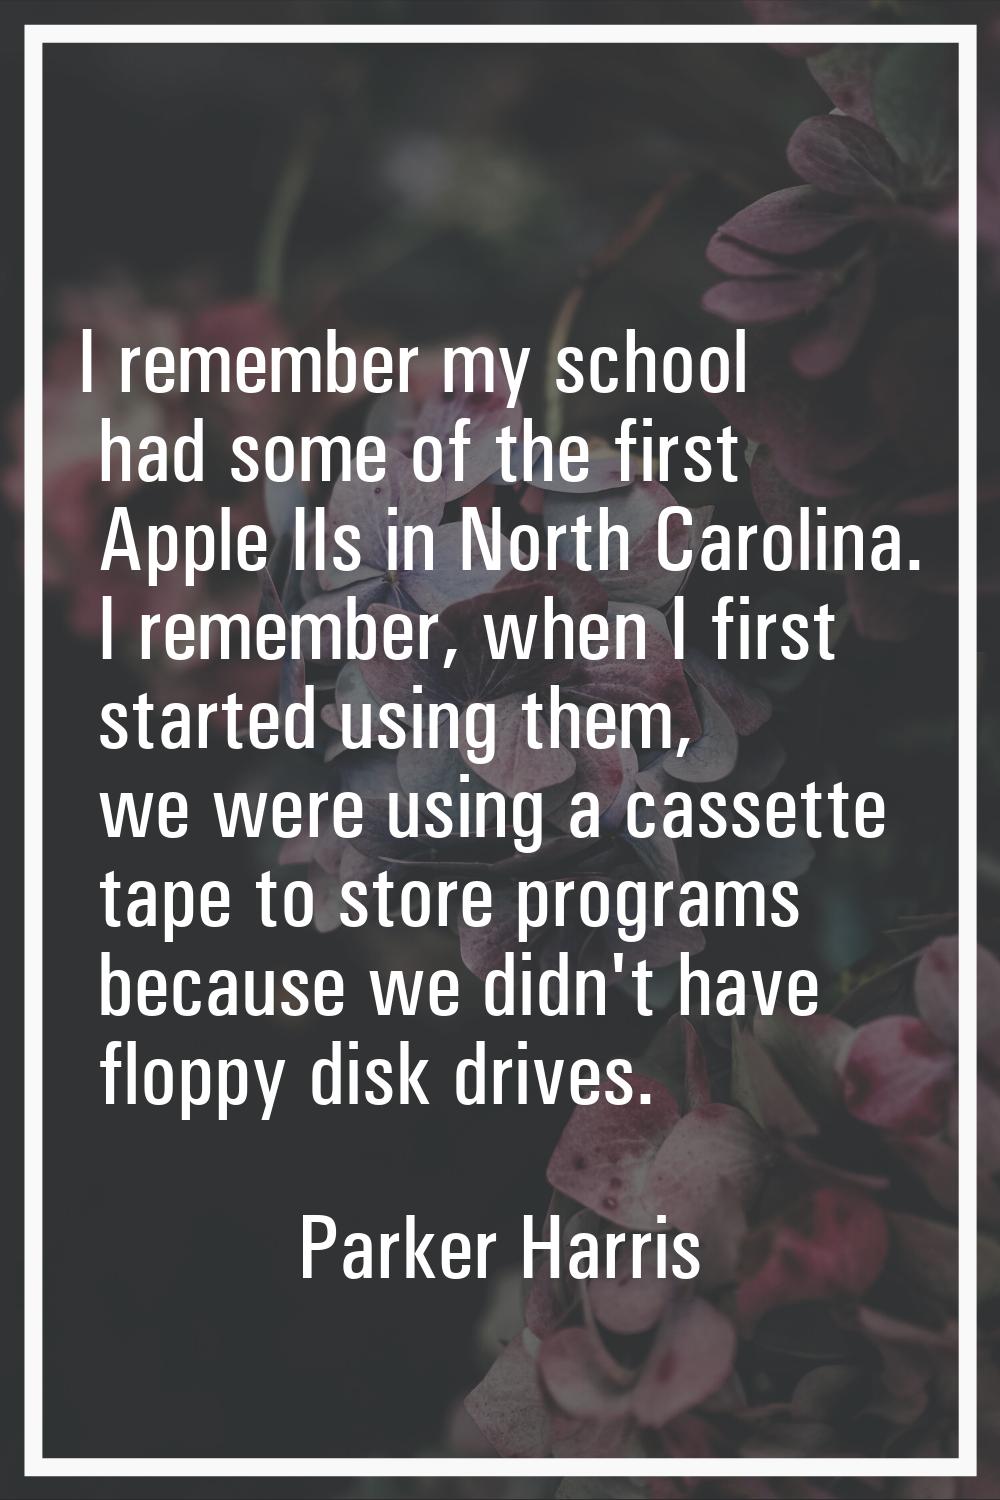 I remember my school had some of the first Apple IIs in North Carolina. I remember, when I first st